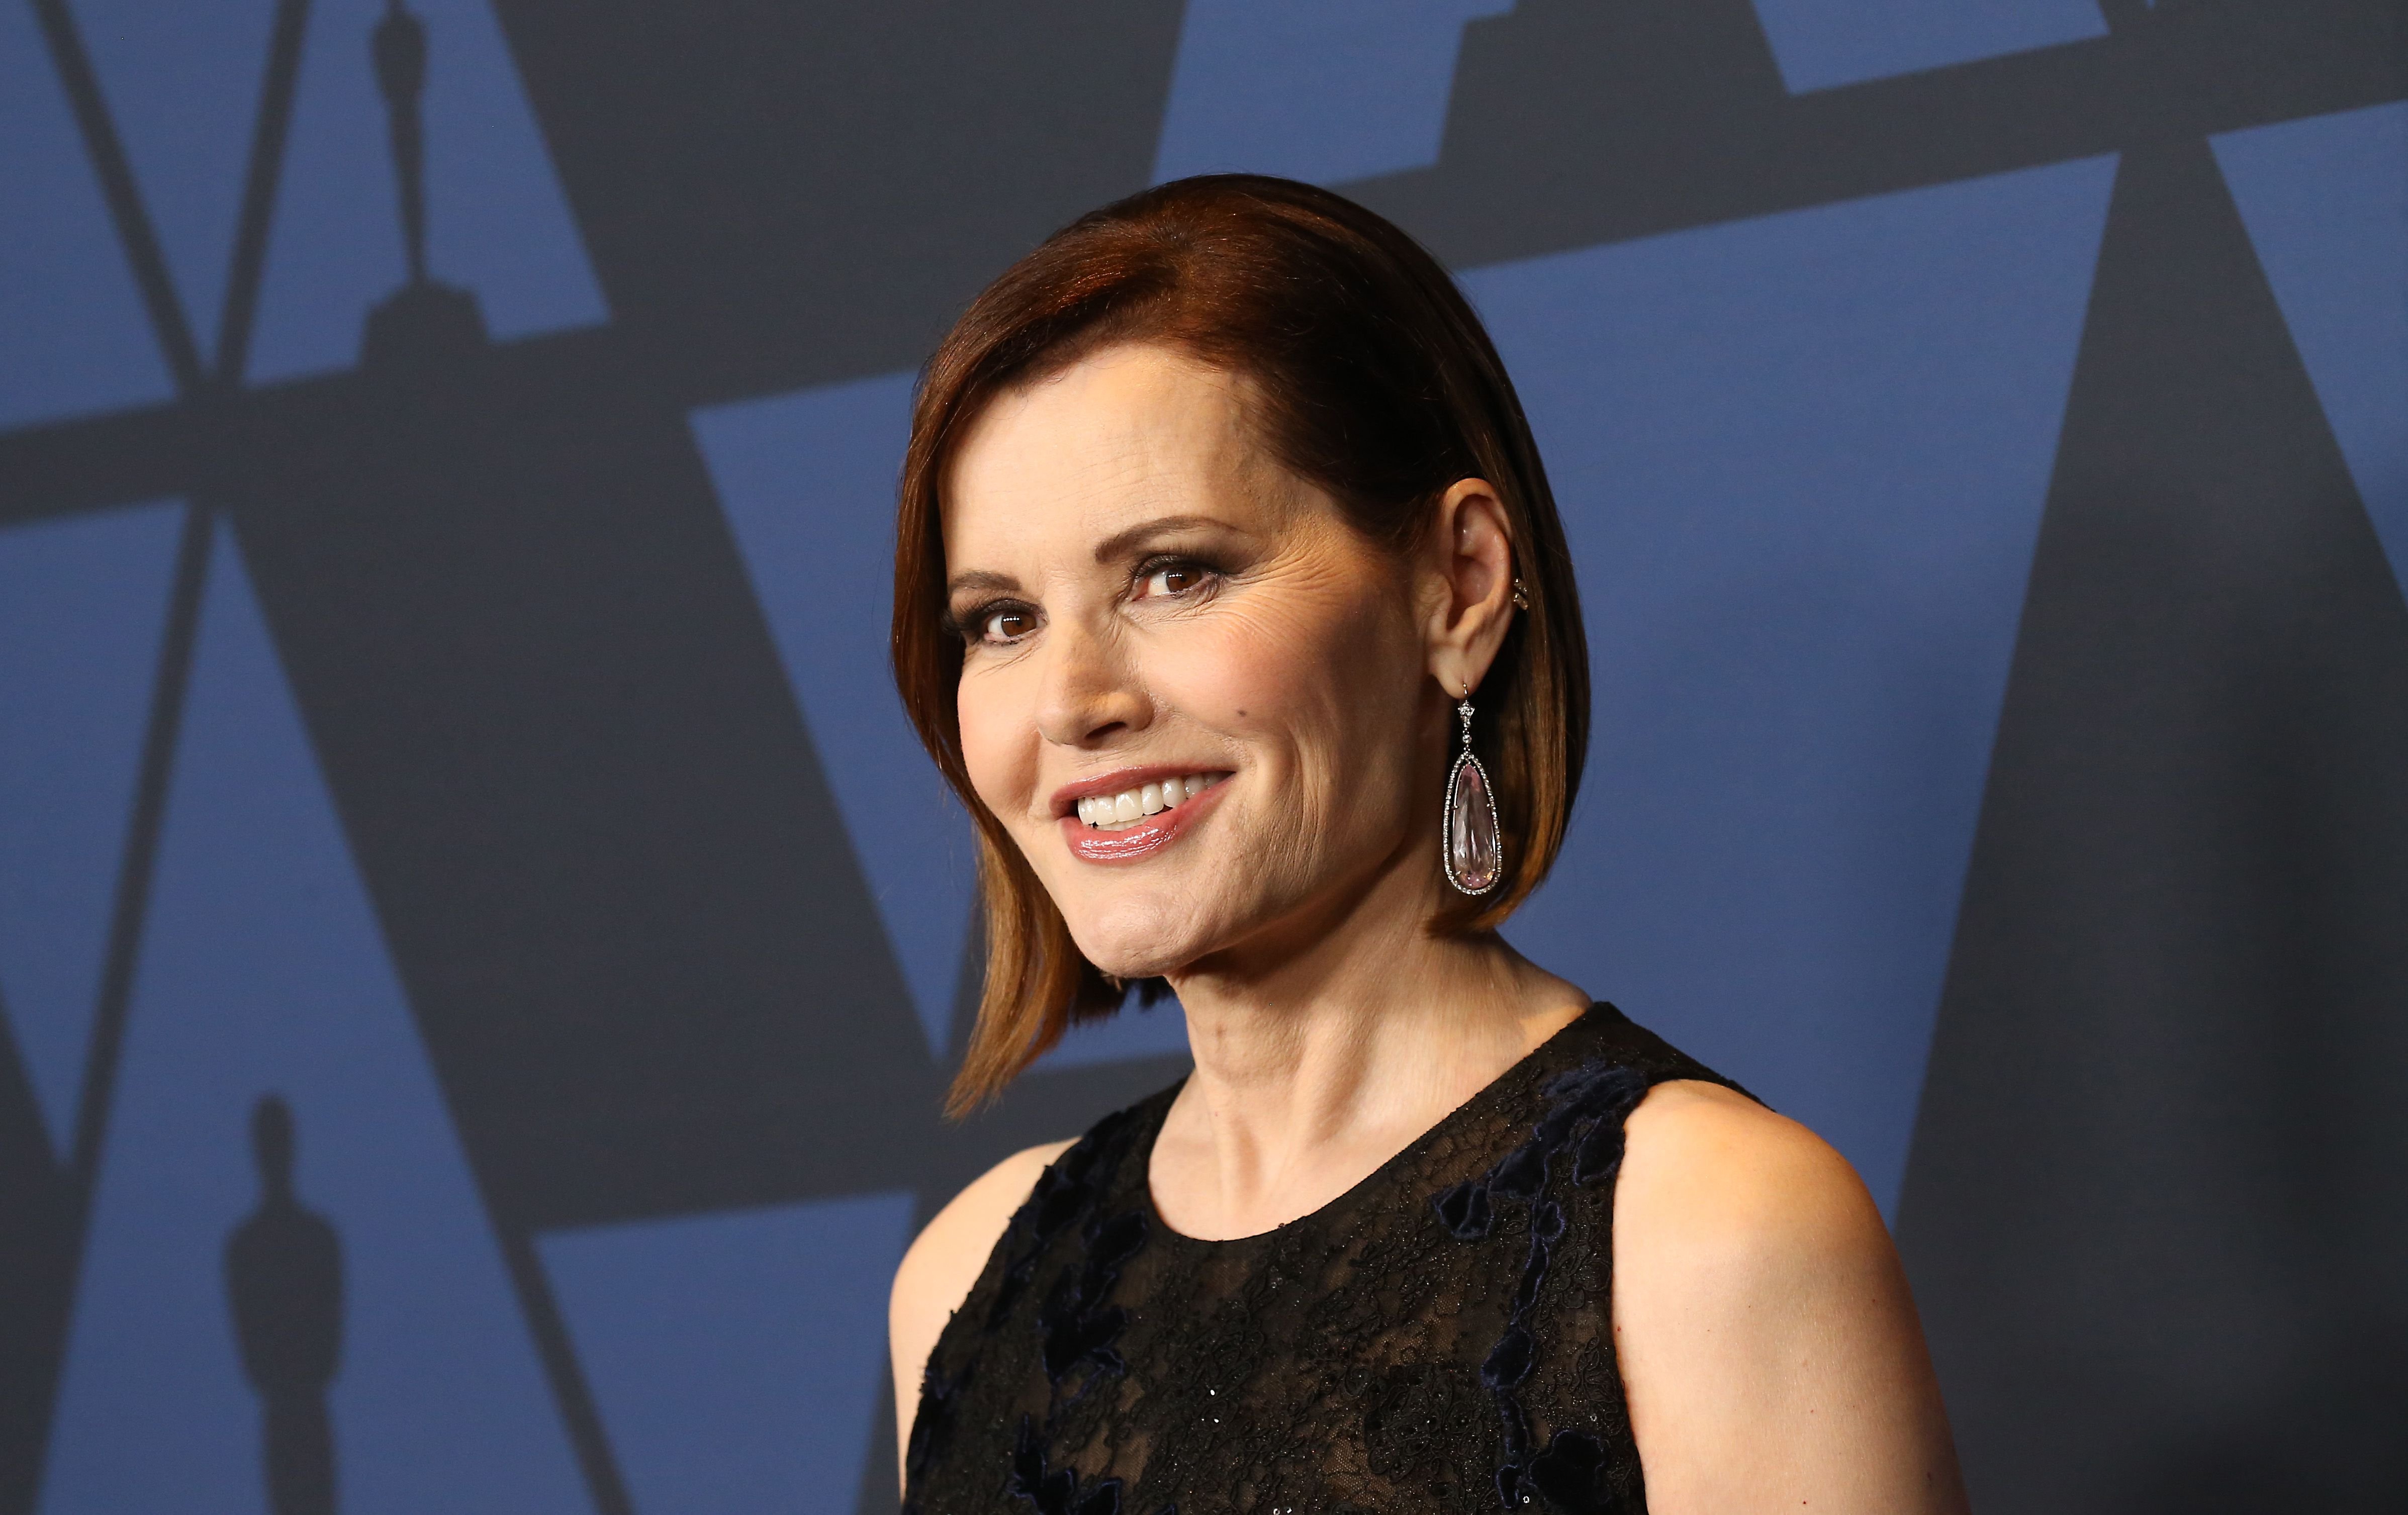 Geena Davis at the Academy of Motion Picture Arts and Sciences' 11th Annual Governors Awards held at The Ray Dolby Ballroom at Hollywood & Highland Center on October 27, 2019 | Photo: Getty Images